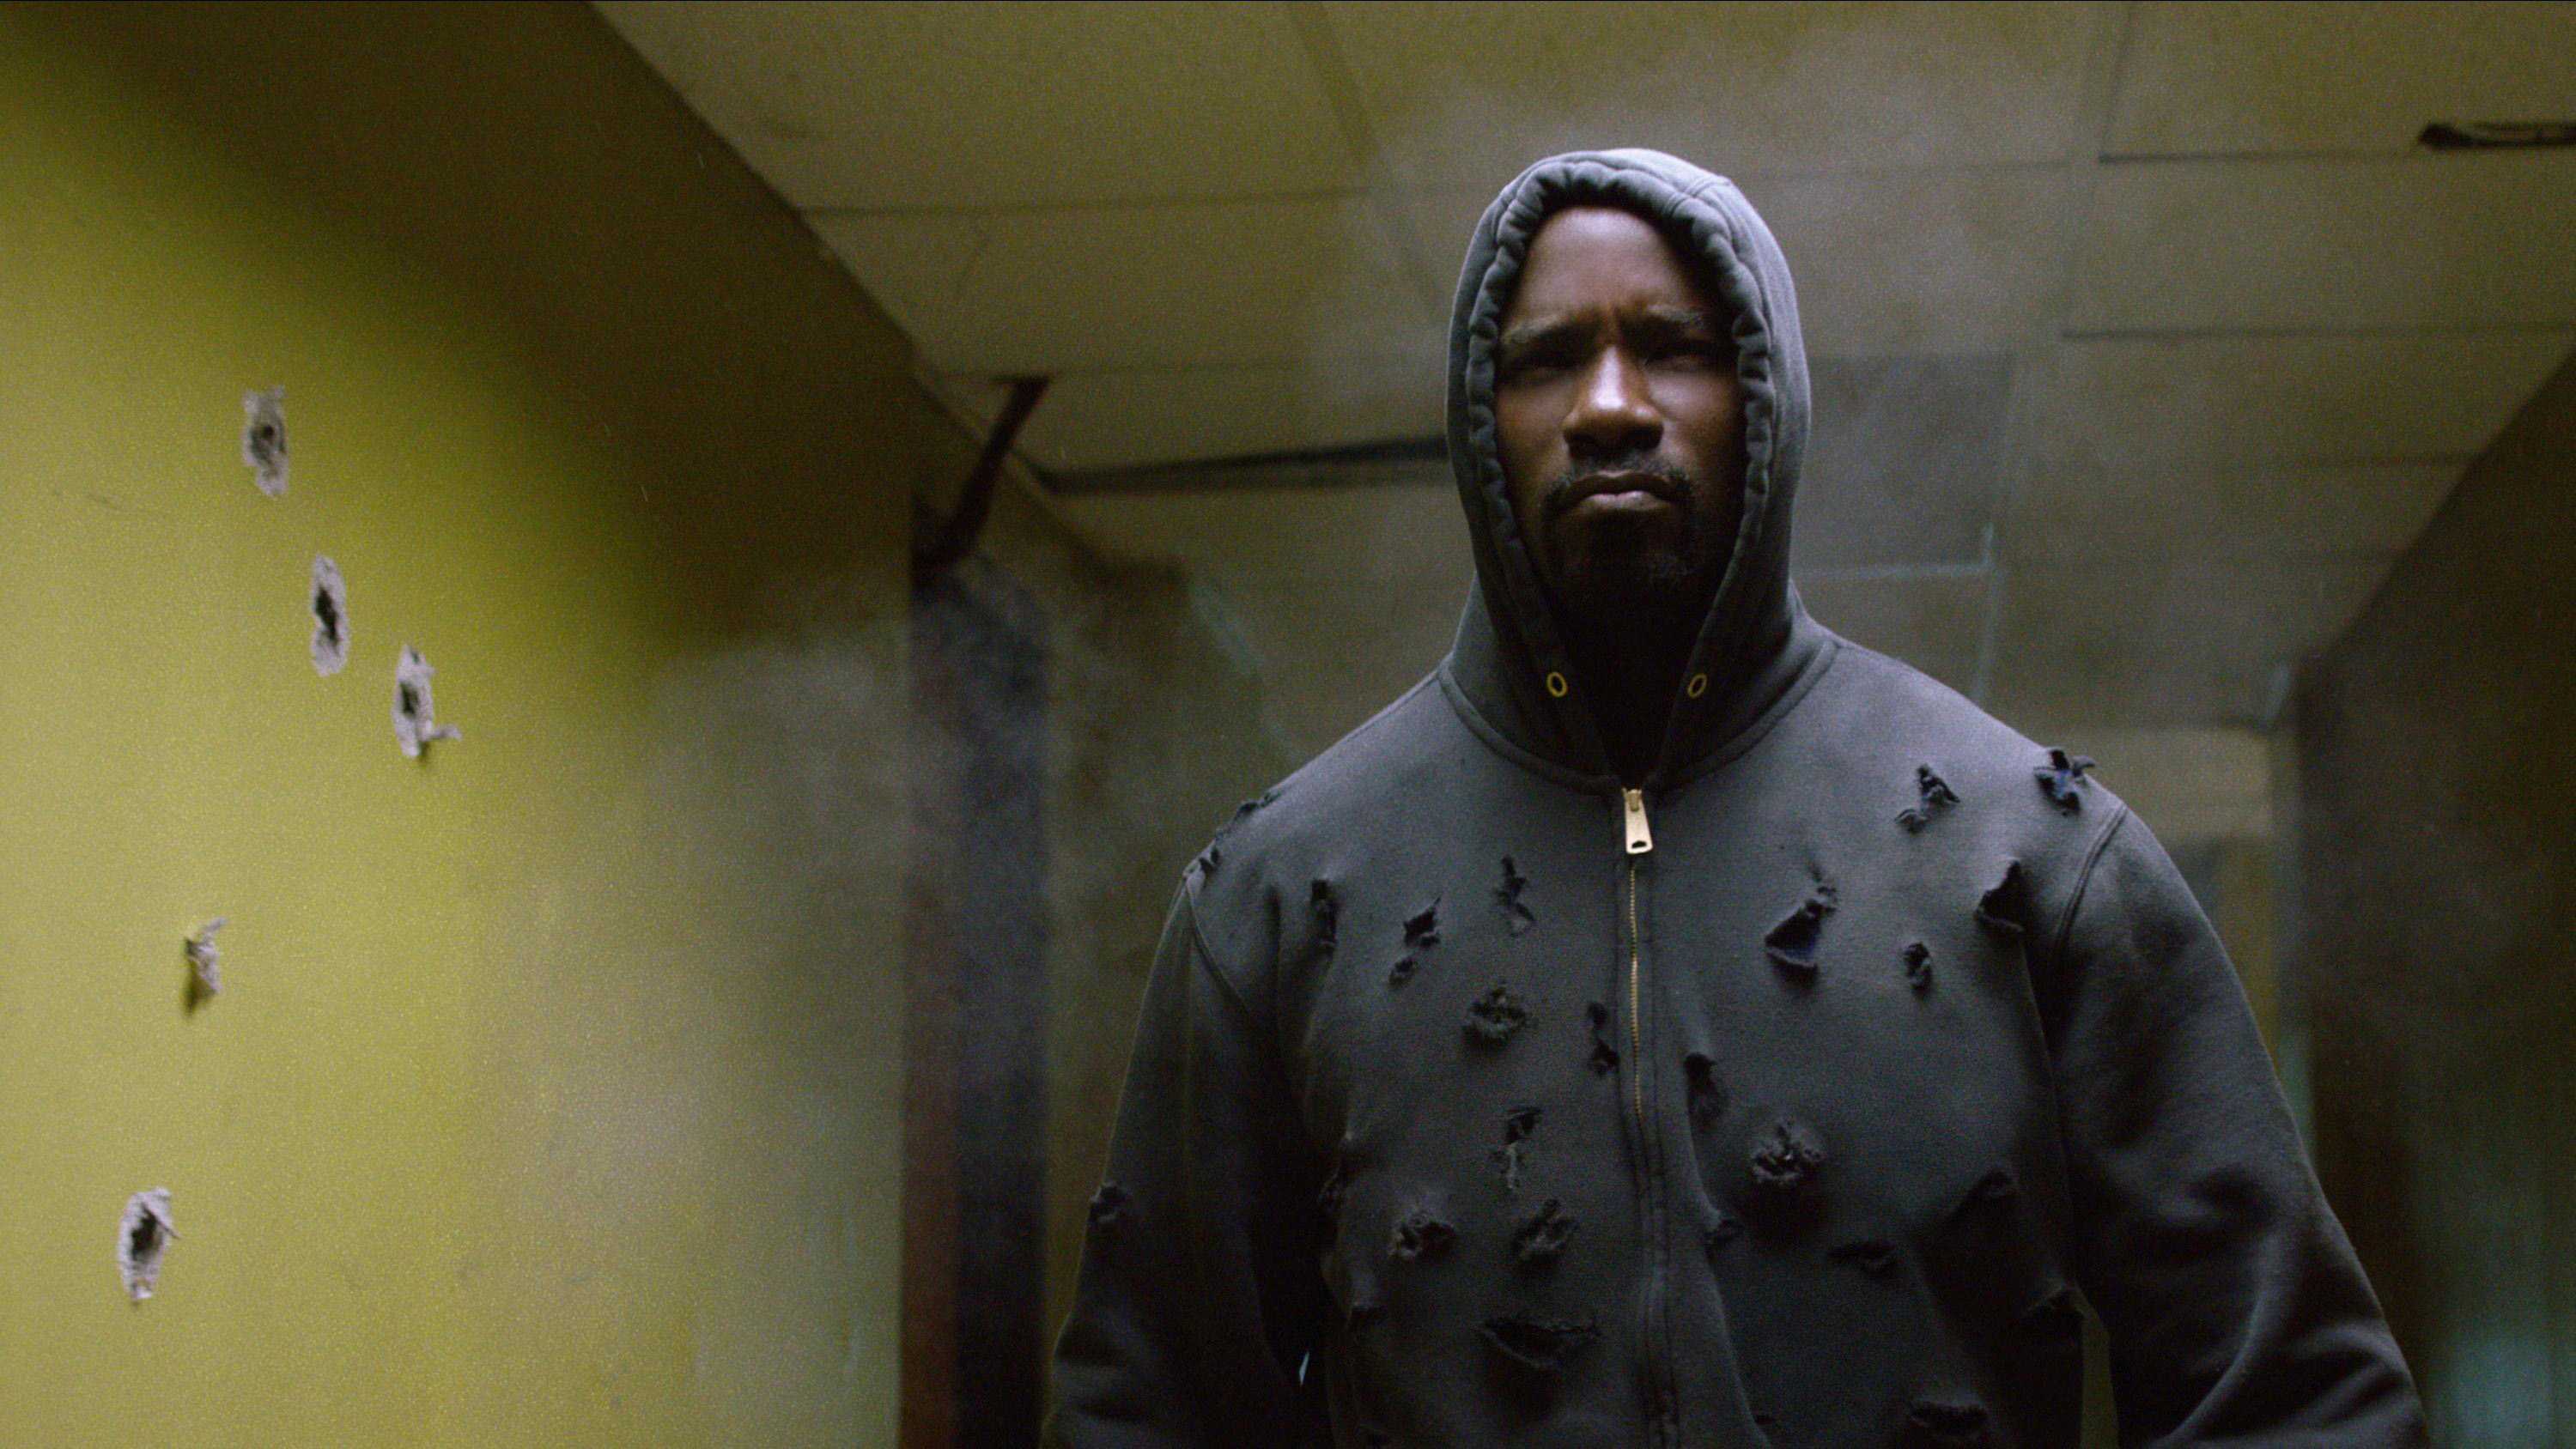 Mike Colter, as Luke Cage, walking through a hallway, with many gunshot holes in his black sweatshirt and along the walls.